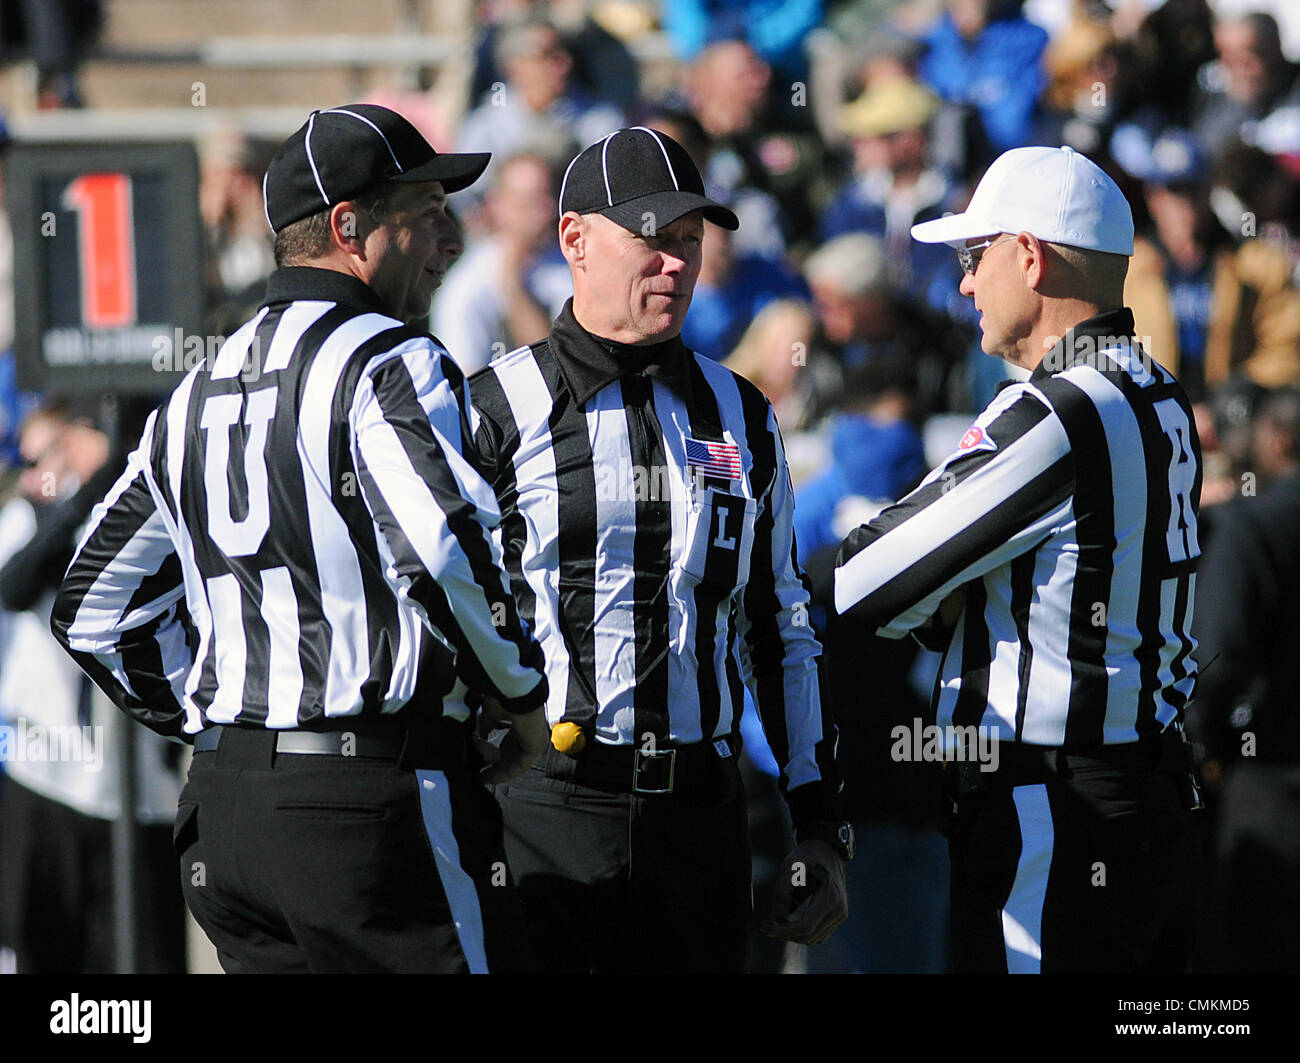 Colorado Springs, Colorado, USA. 2nd Nov, 2013. Game officials, Umpire, Jim Eckl, Line Judge, Hugh Campbell, and Referee, Jeff Flanagan, during a military academy match-up between the Army Black Knights and the Air Force Academy Falcons at Falcon Stadium, U.S. Air Force Academy, Colorado Springs, Colorado. Air Force defeats Army 42-28 Credit:  csm/Alamy Live News Stock Photo